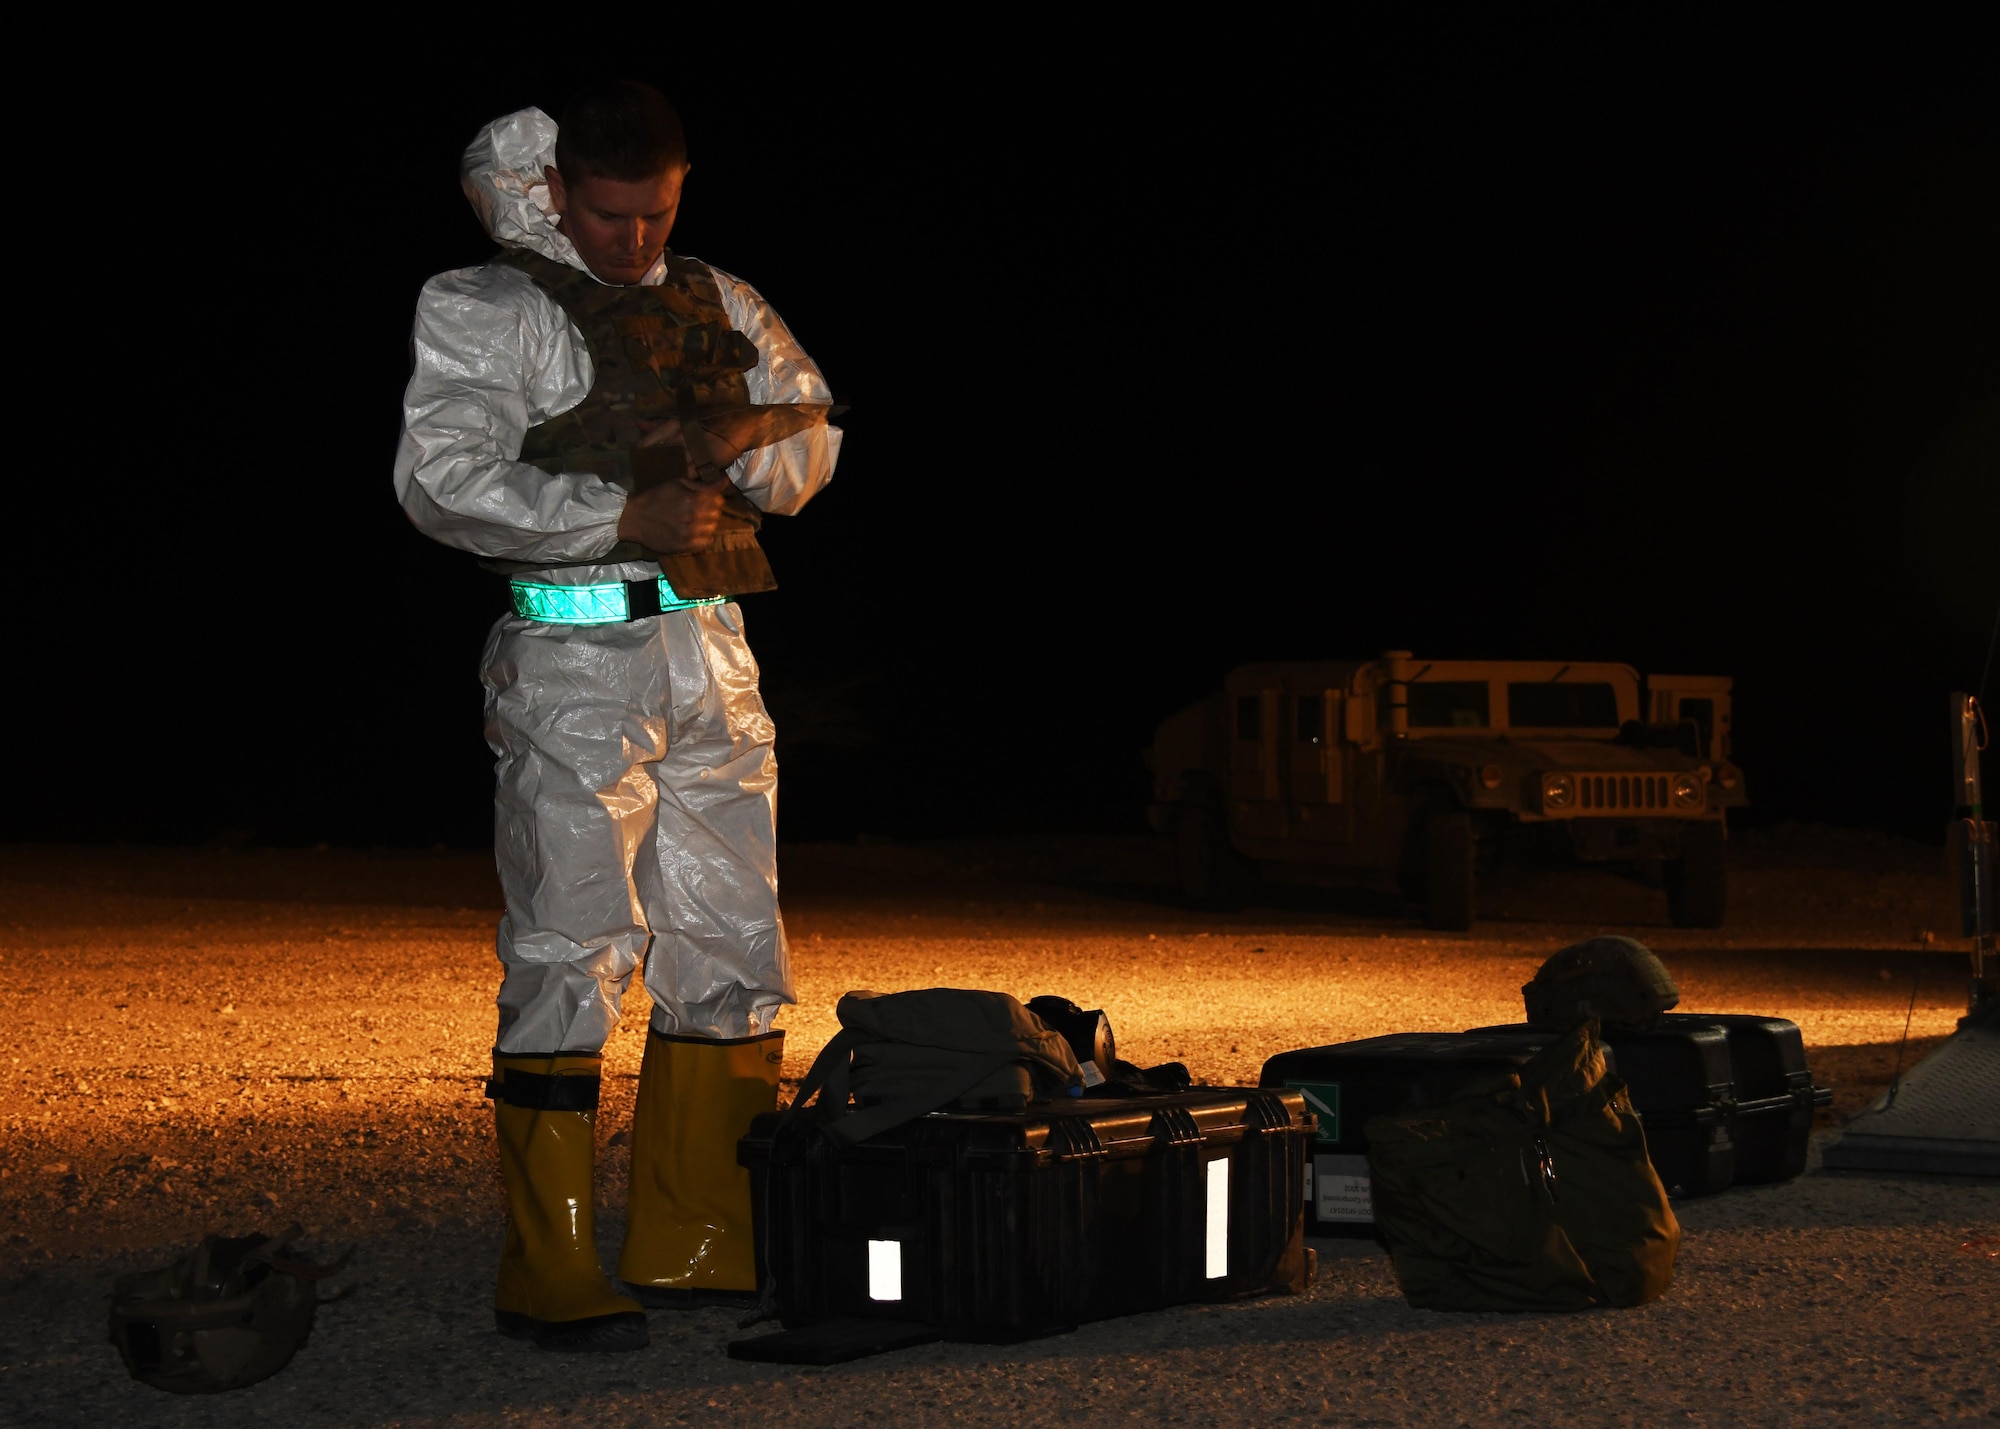 U.S. Air Force Tec. Sgt. Zachary Holschuh, 379th Expeditionary Civil Engineer Squadron explosive ordinance disposal operations section chief, dons his personal protective equipment at Al Udeid Air Base, Qatar, Nov. 9, 2016. Holschuh is a member of the EOD team that participated in an exercise involving a stolen vehicle with possible radiological material. (U.S. Air Force photo by Senior Airman Miles Wilson)